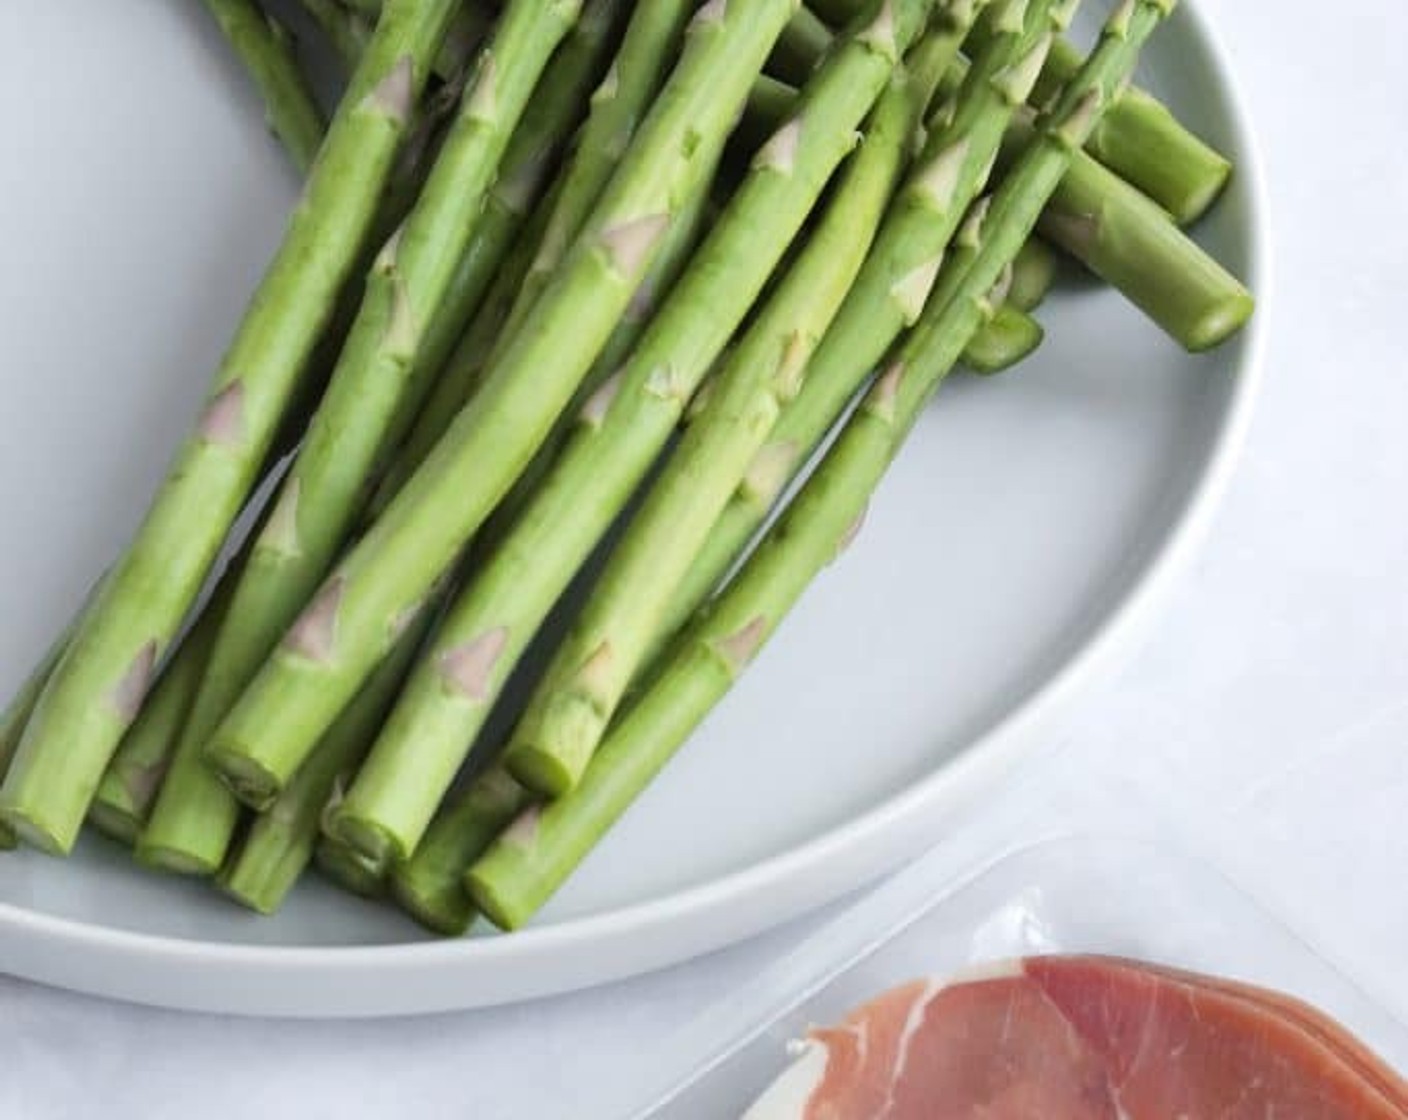 step 2 Trim the tough ends off of the Asparagus (3 cups). Take the Prosciutto (6 oz) slices and cut them in half horizontally so you have long strips to wrap.